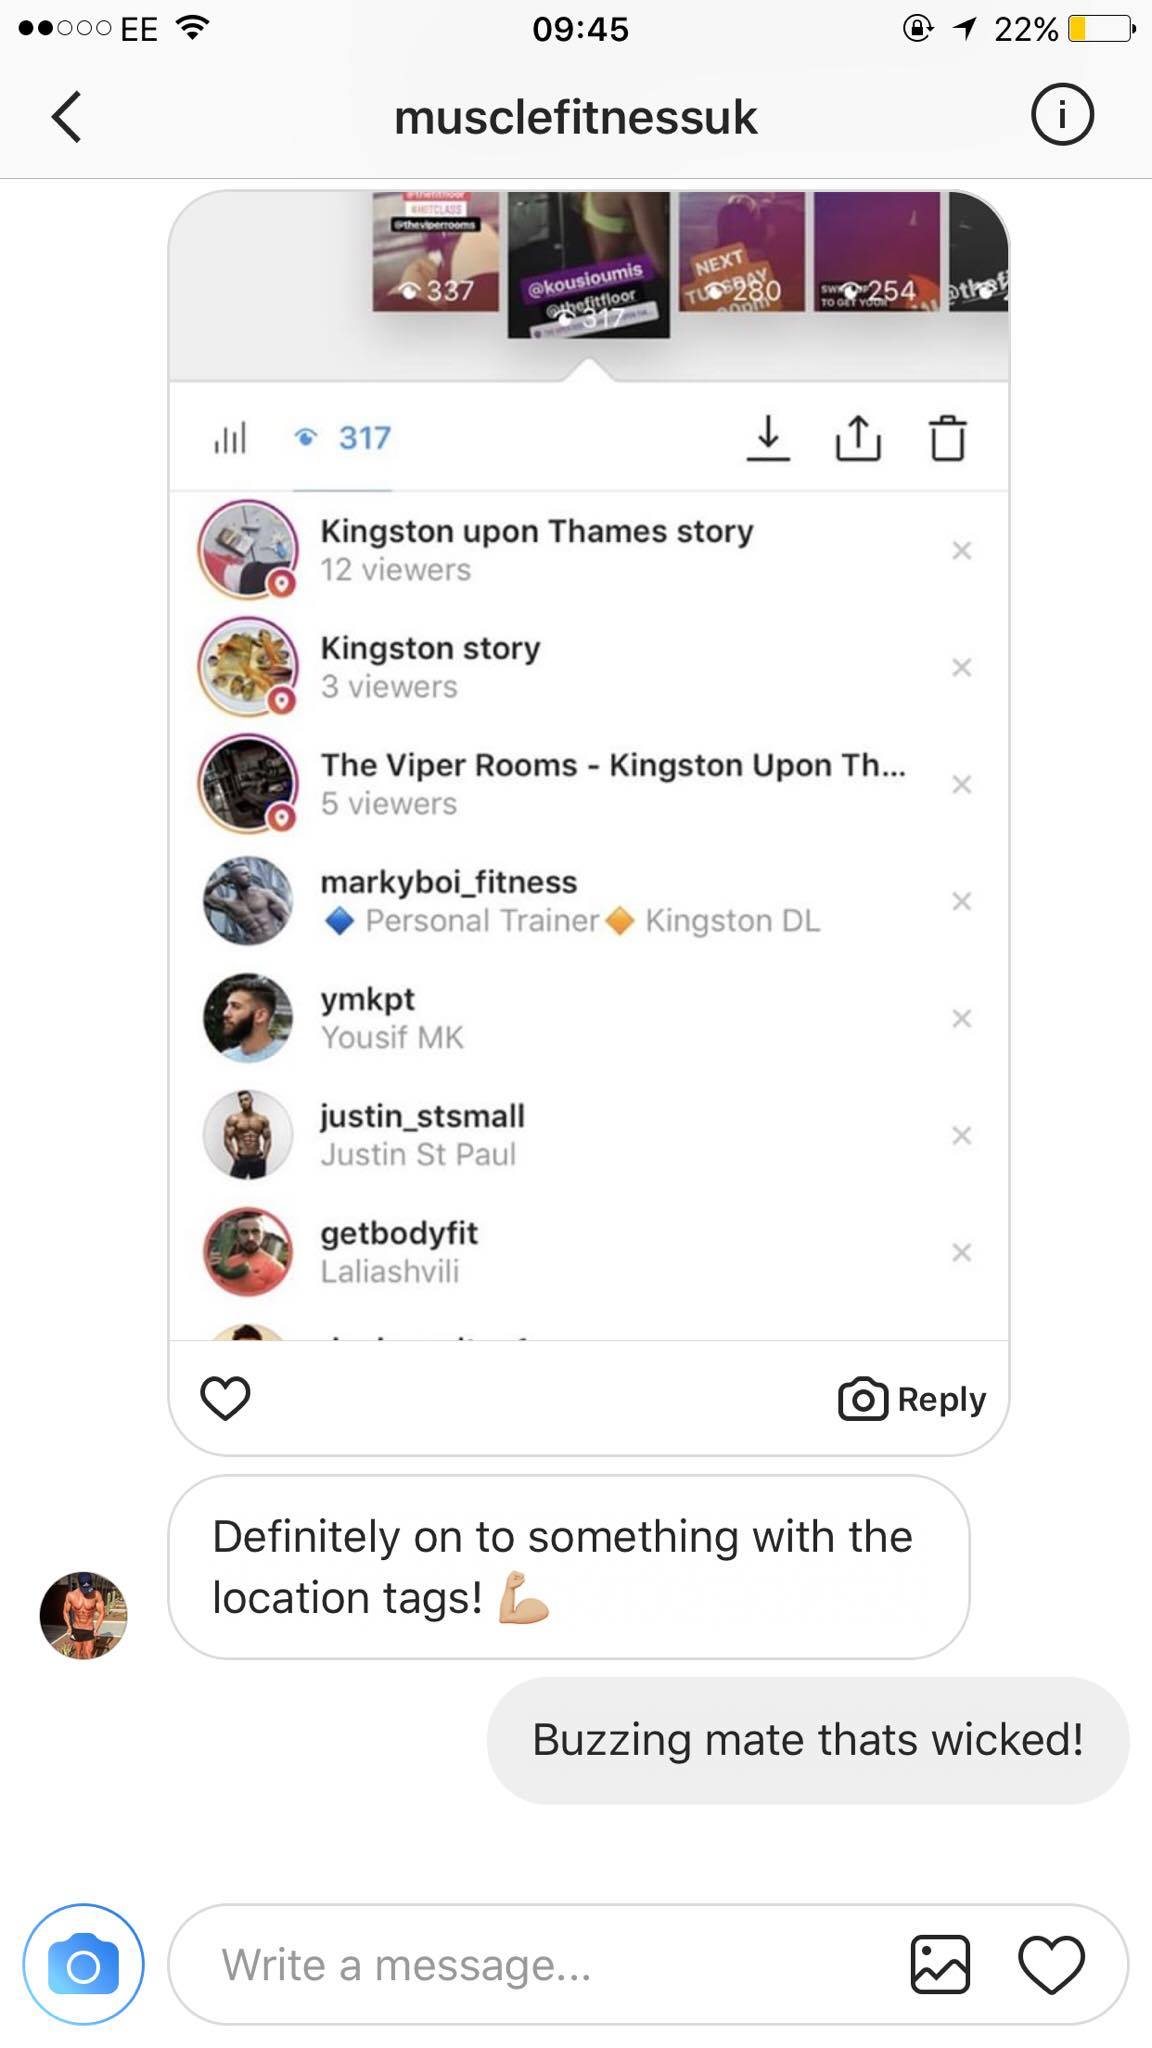 download a story from instagram